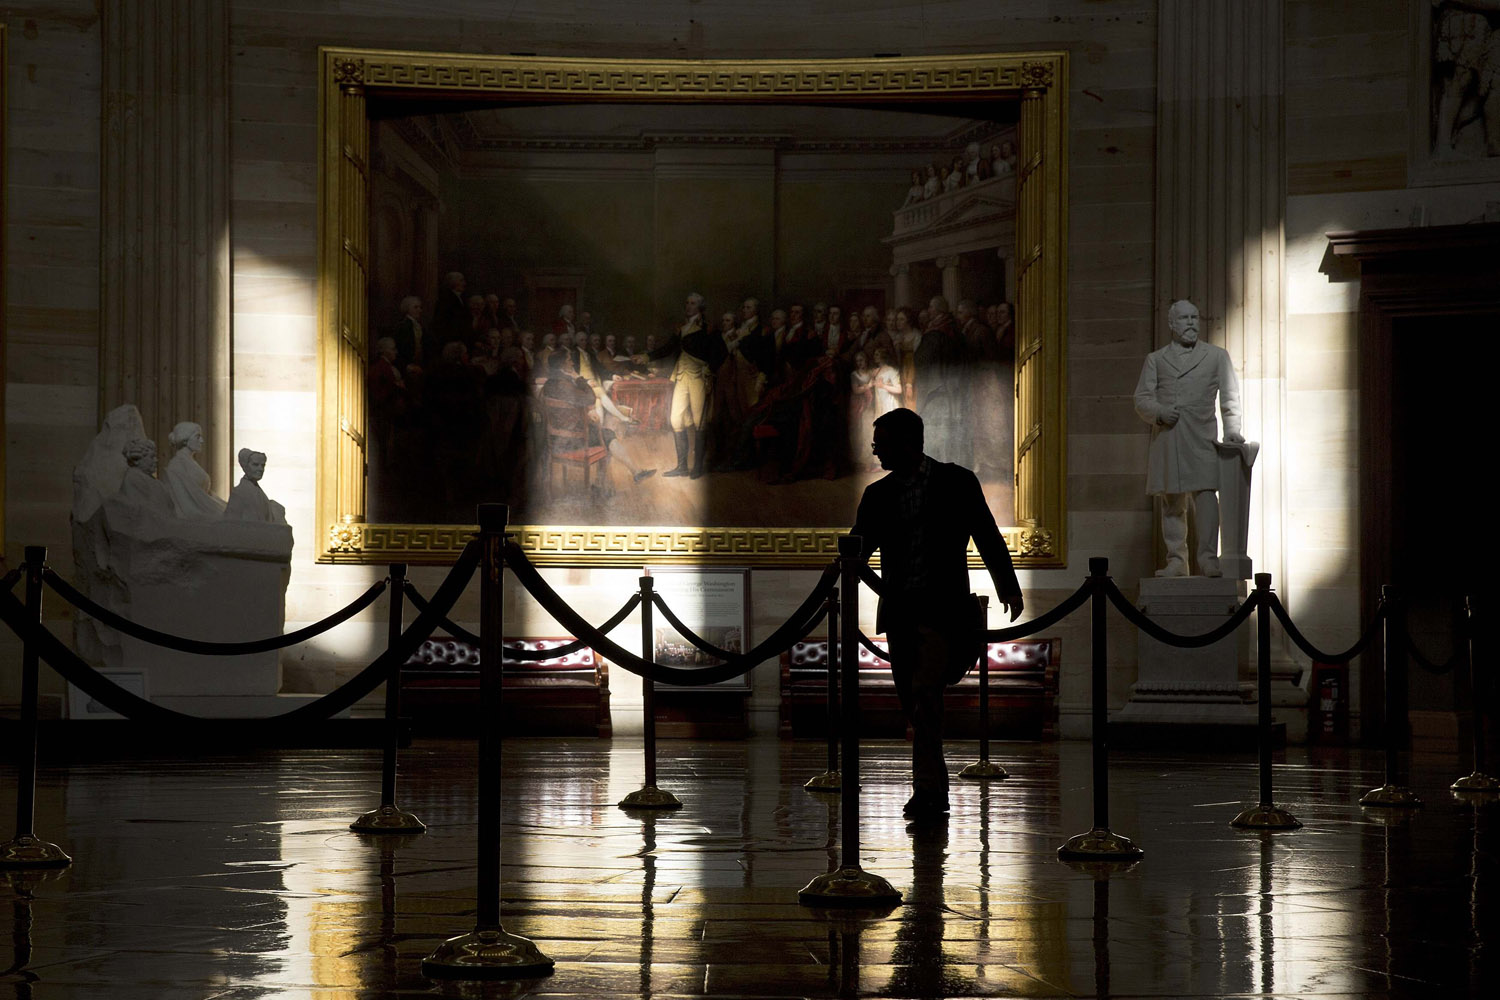 A man walks through the Rotunda of the U.S. Capitol during the partial government shutdown in Washington